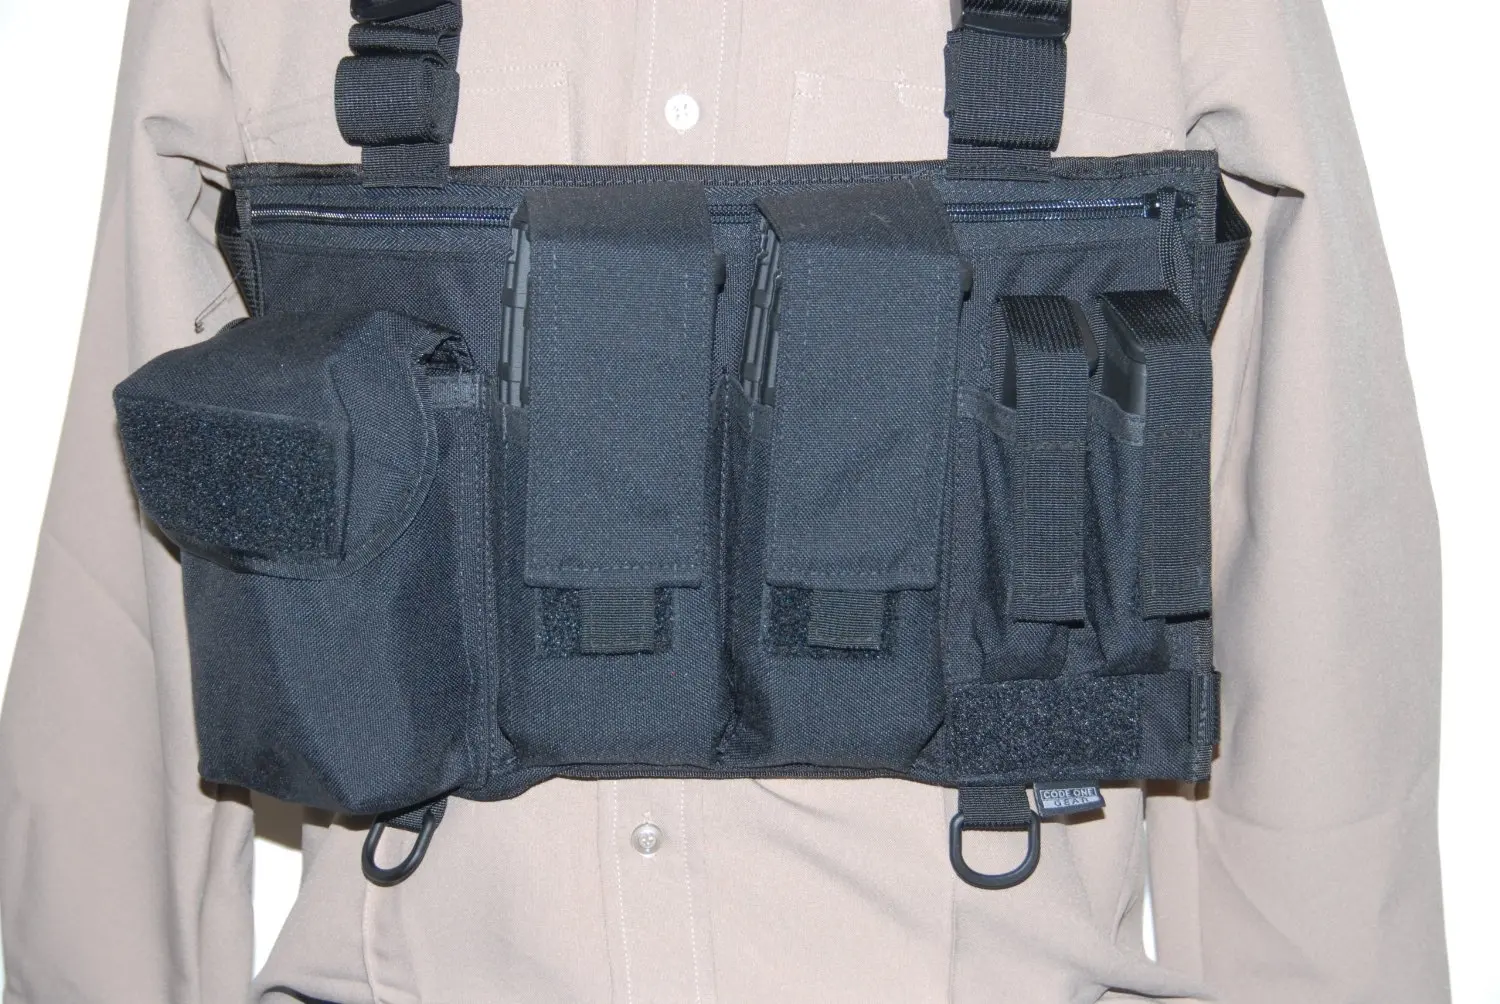 Cheap Pistol Chest Rig, find Pistol Chest Rig deals on line at Alibaba.com